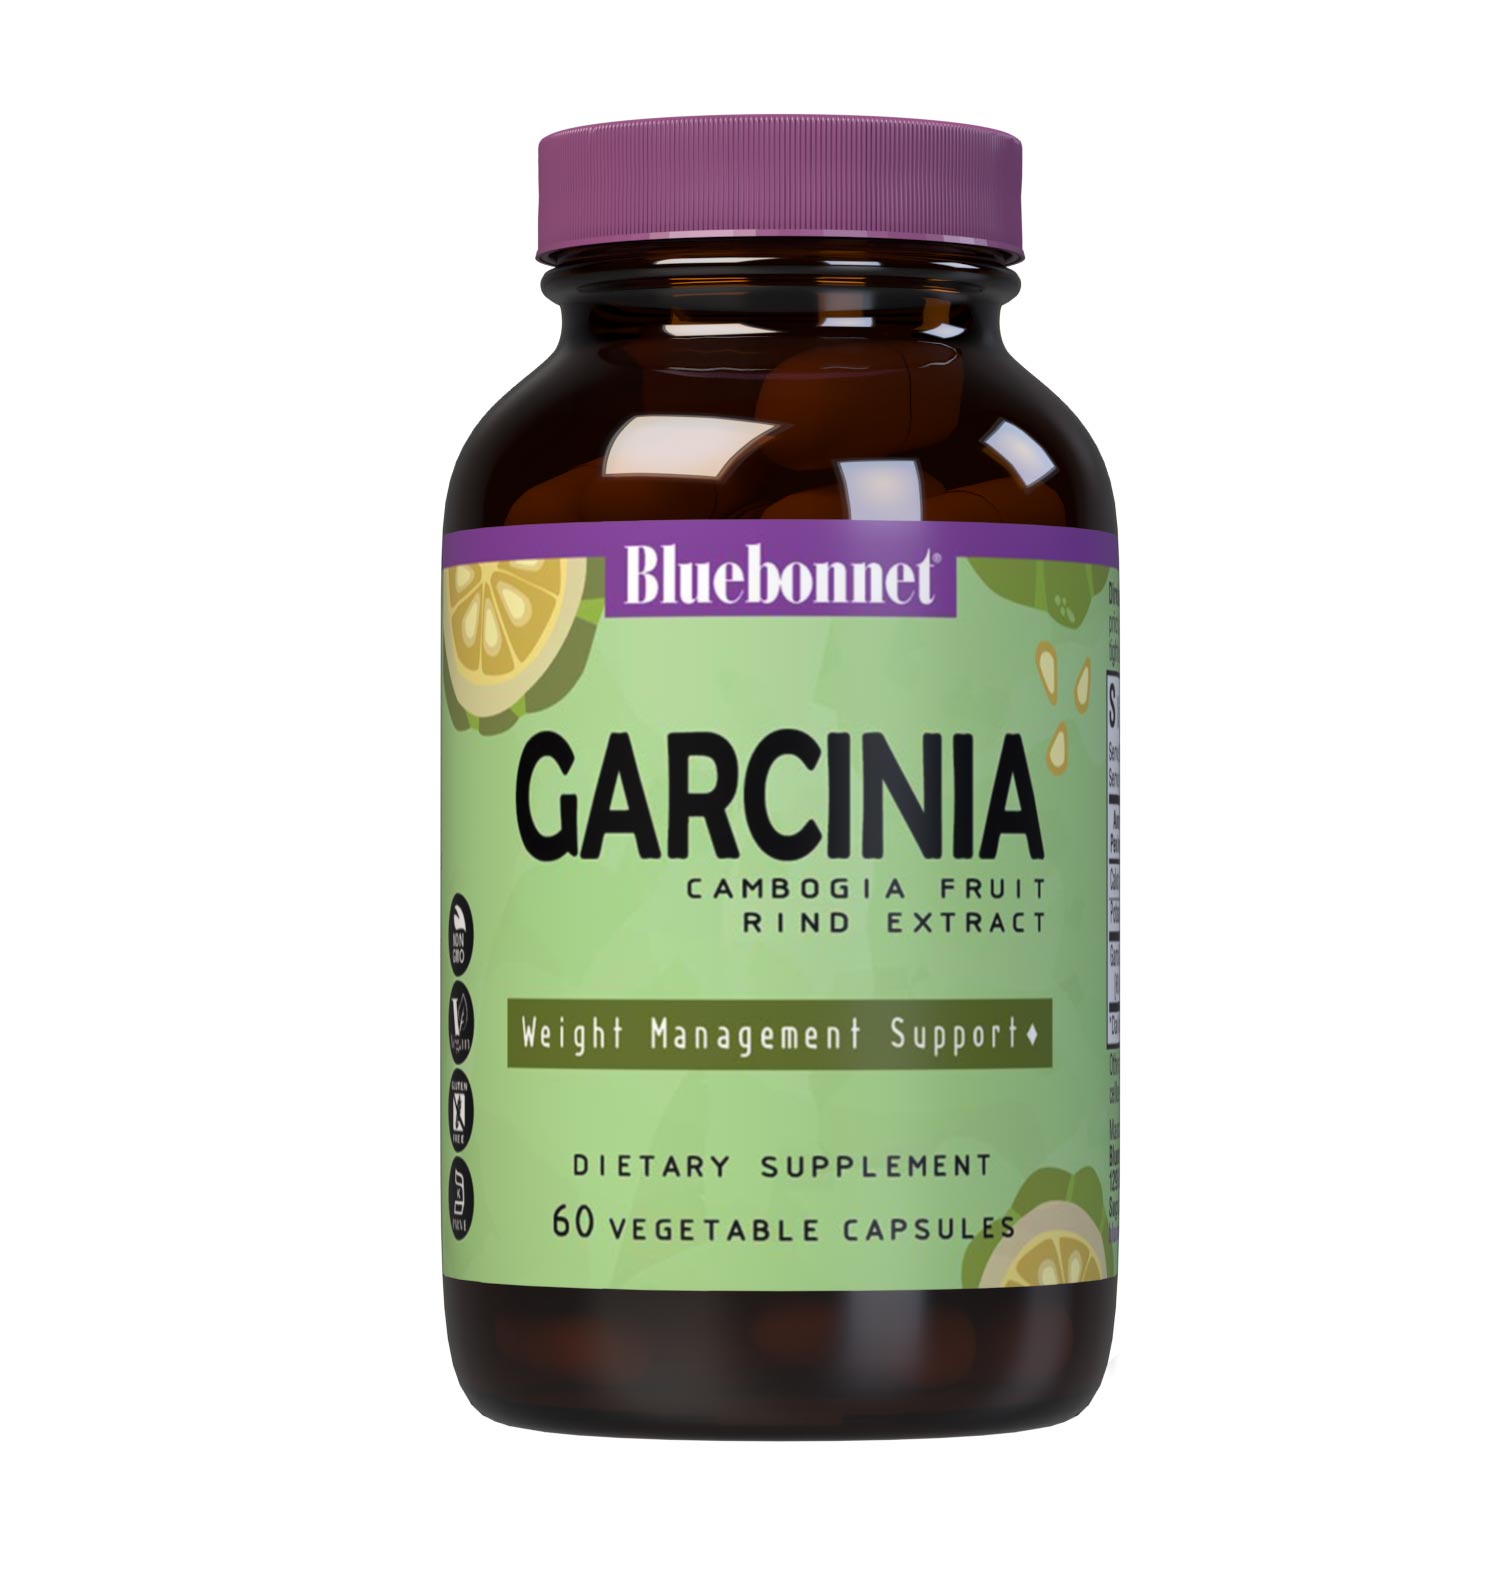 Bluebonnet’s Super Fruit Garcinia Cambogia Fruit Rind Extract 60 Vegetable Capsules are formulated with a patented Garcinia cambogia extract, known as Super CitriMax, that is standardized for 60% hydroxycitric acid (HCA). When combined with proper diet and exercise, HCA may support healthy weight management by inhibiting fat production, burning fat, and curbing appetite.  #size_60 count